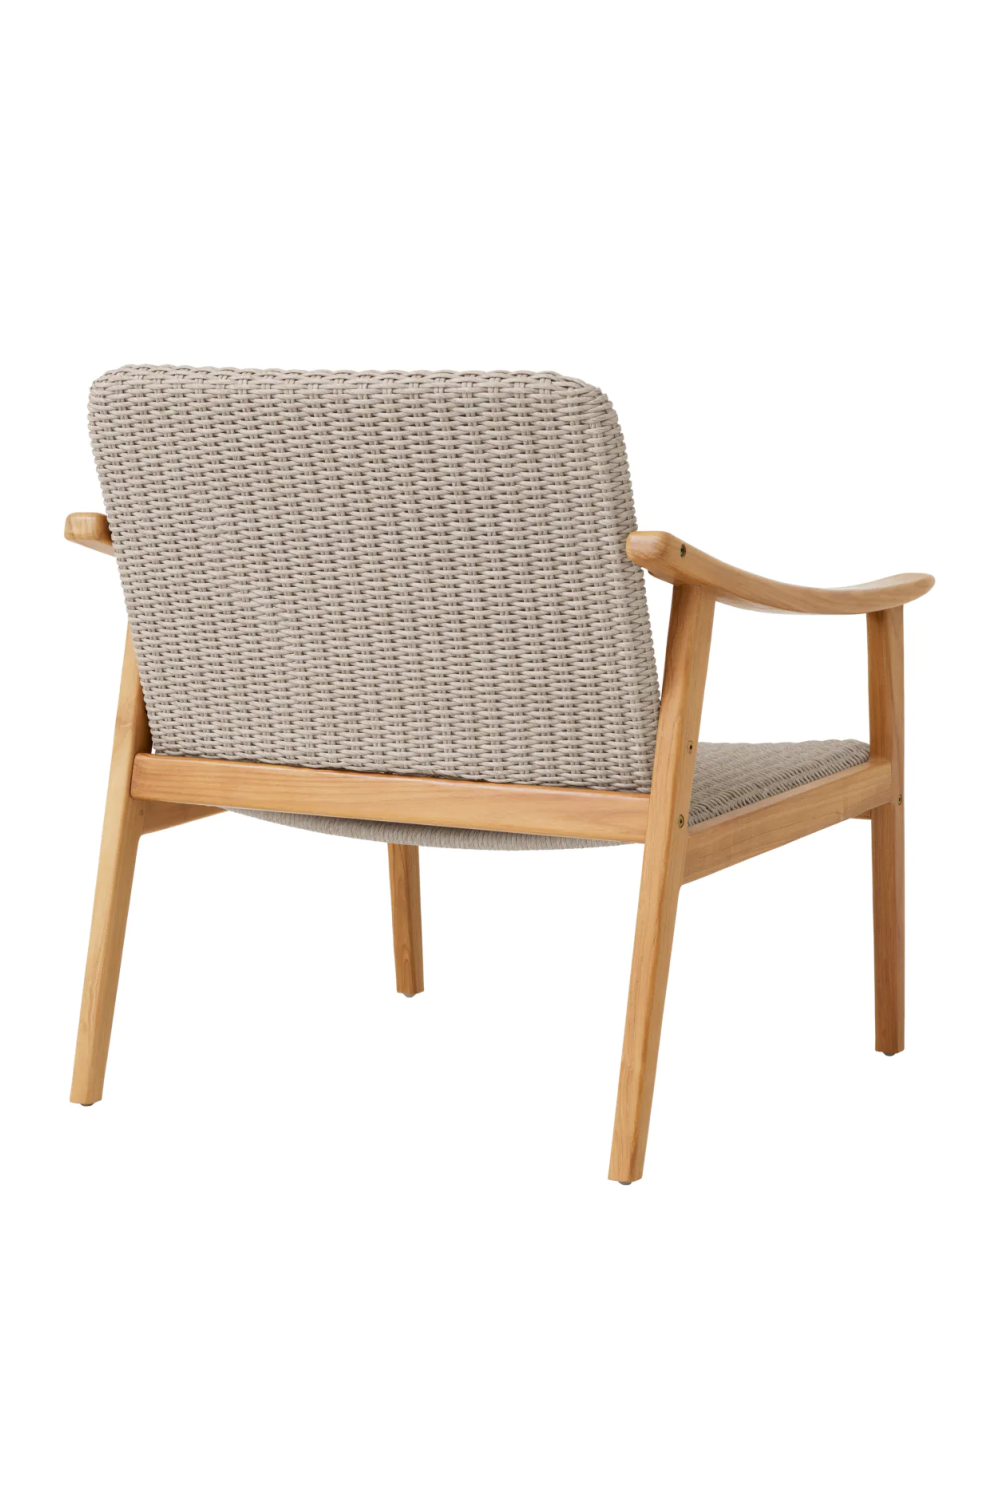 Taupe Weave Outdoor Lounge Chair | Eichholtz Honolulu | Oroa.com